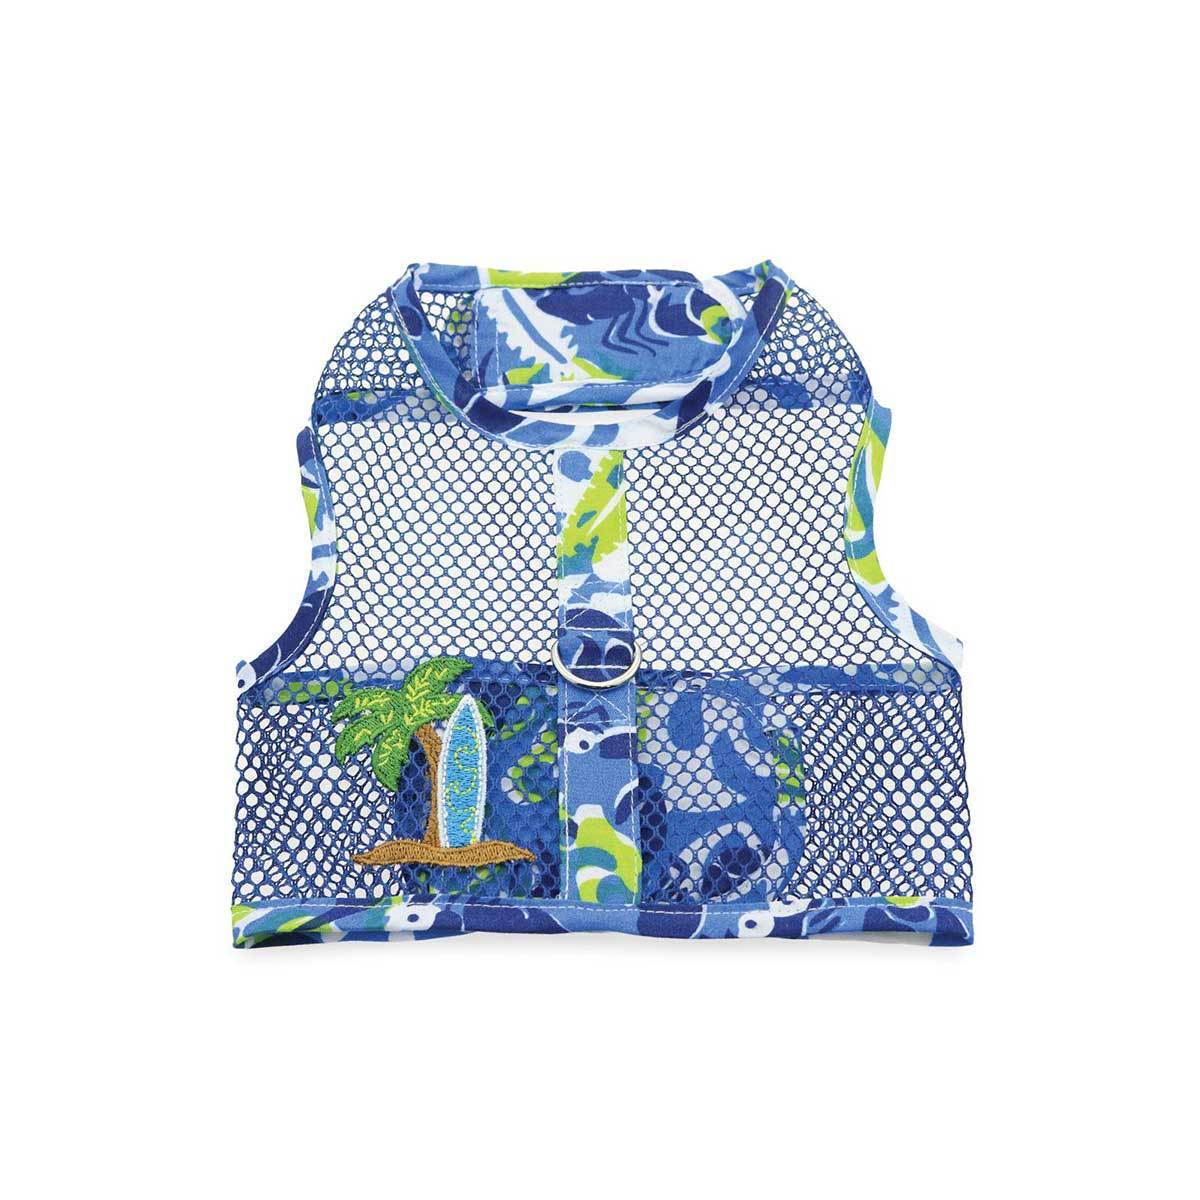 Cool Mesh Dog Harness - Surfboard Blue and Green | Pawlicious & Company